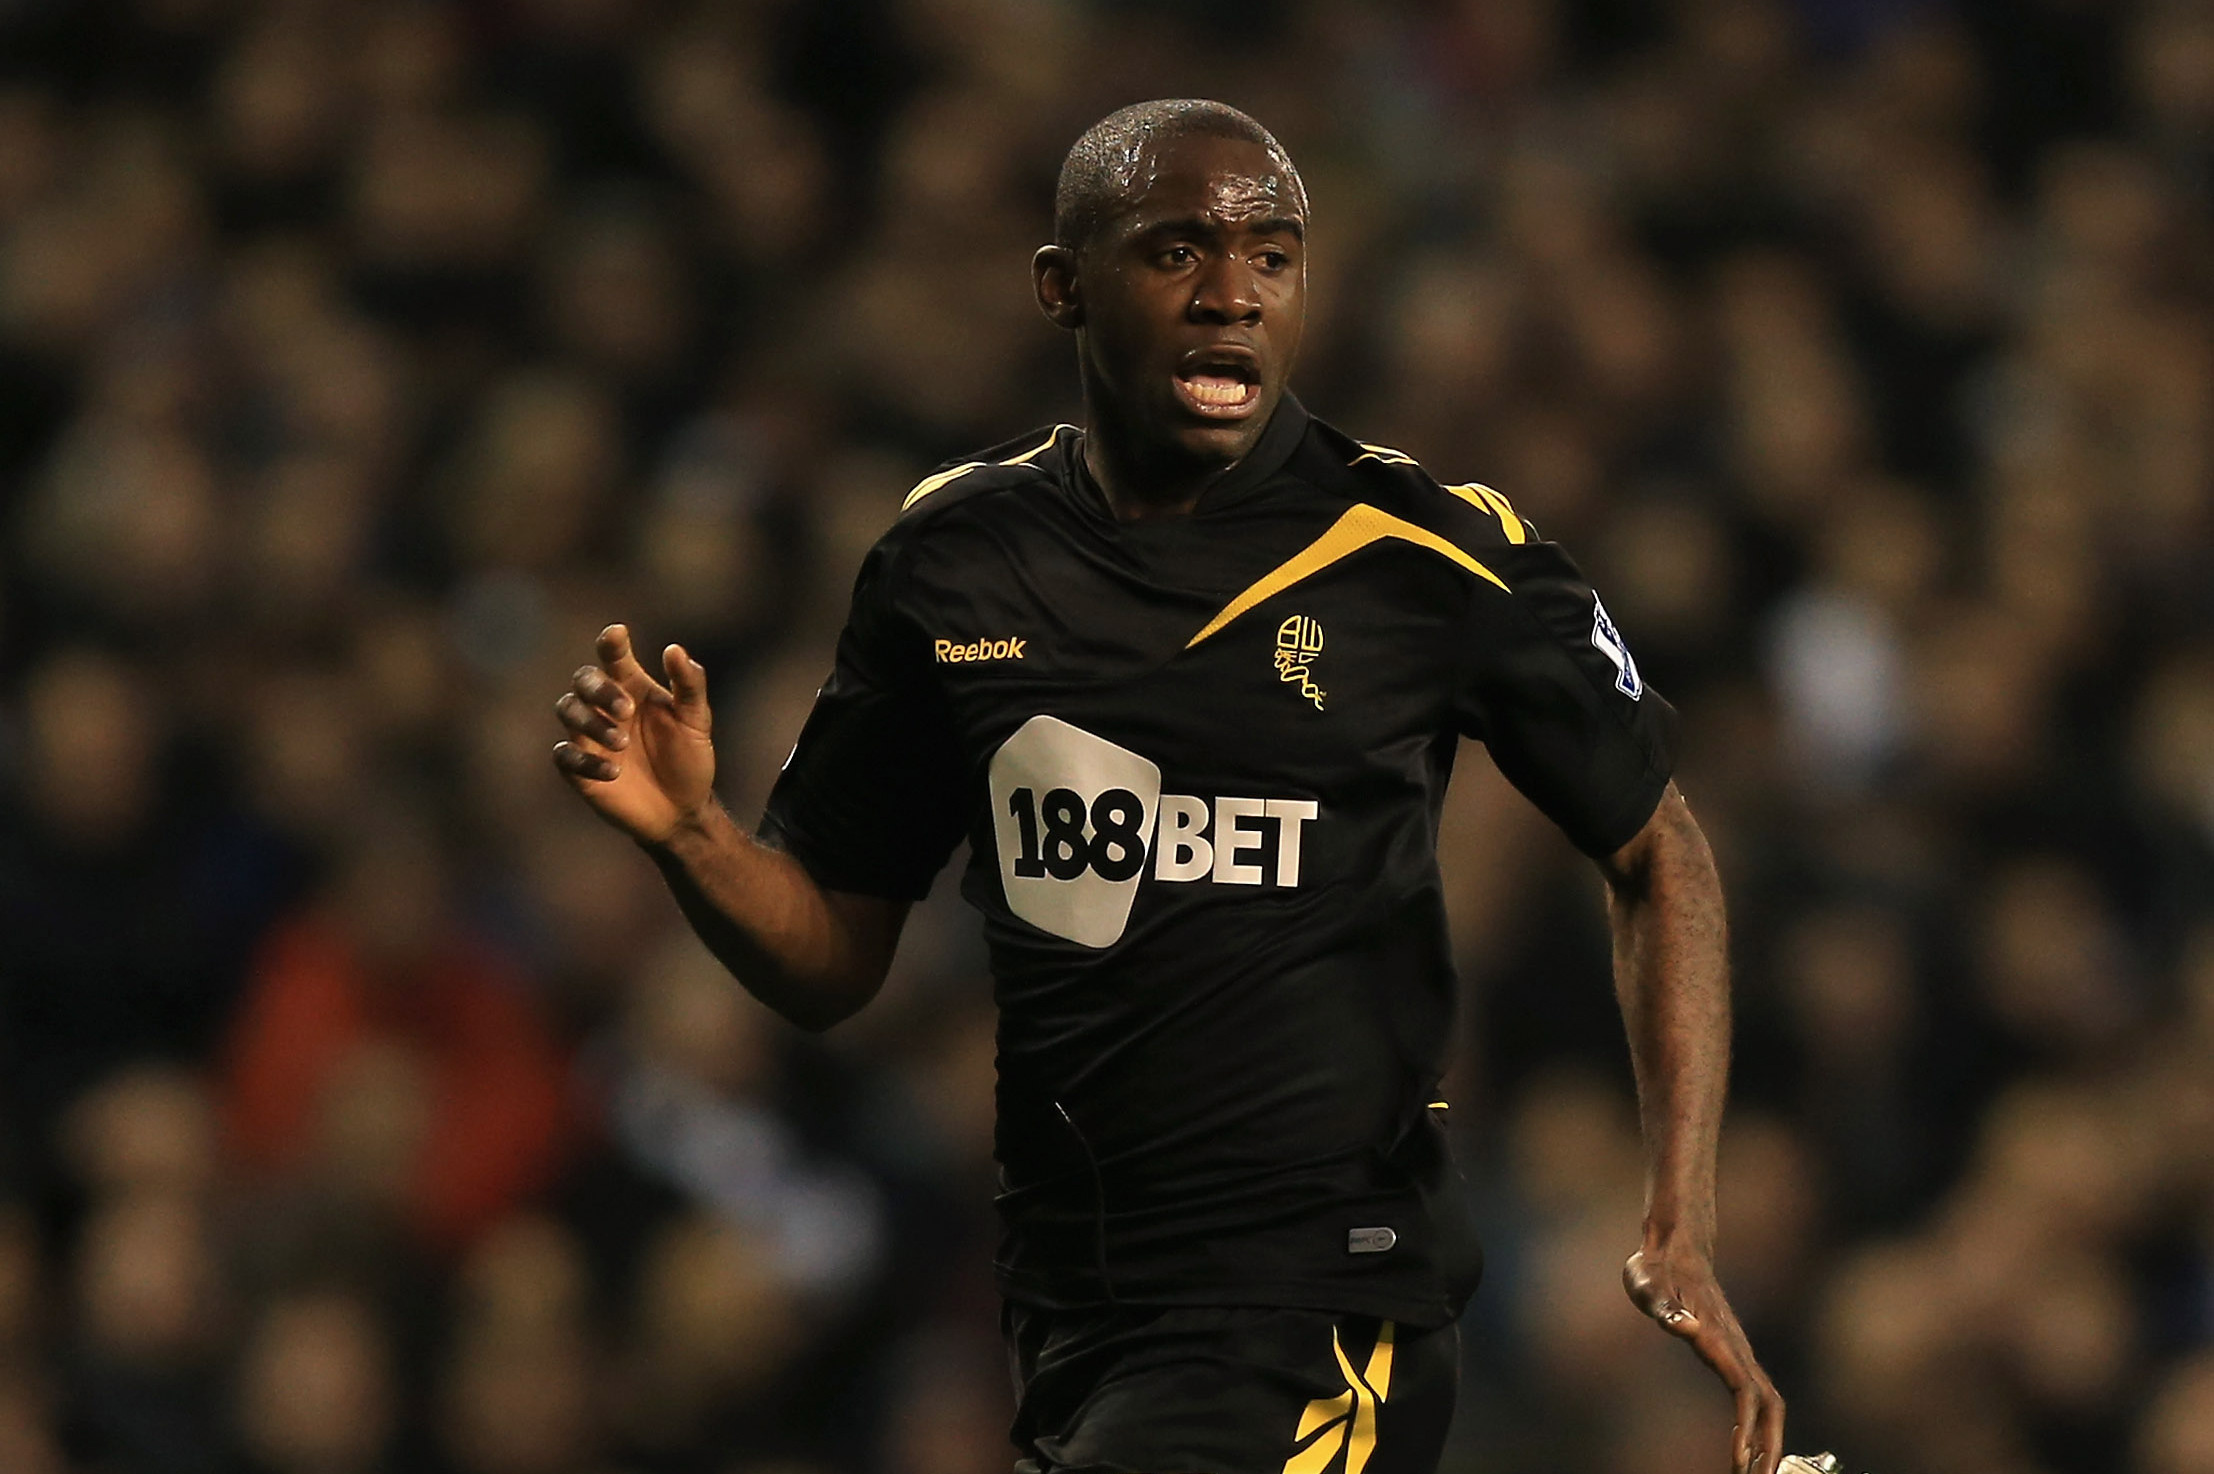 Fabrice Muamba Update: Latest News and Info on Bolton Star Following Collapse | Bleacher Report | Latest News, Videos and Highlights